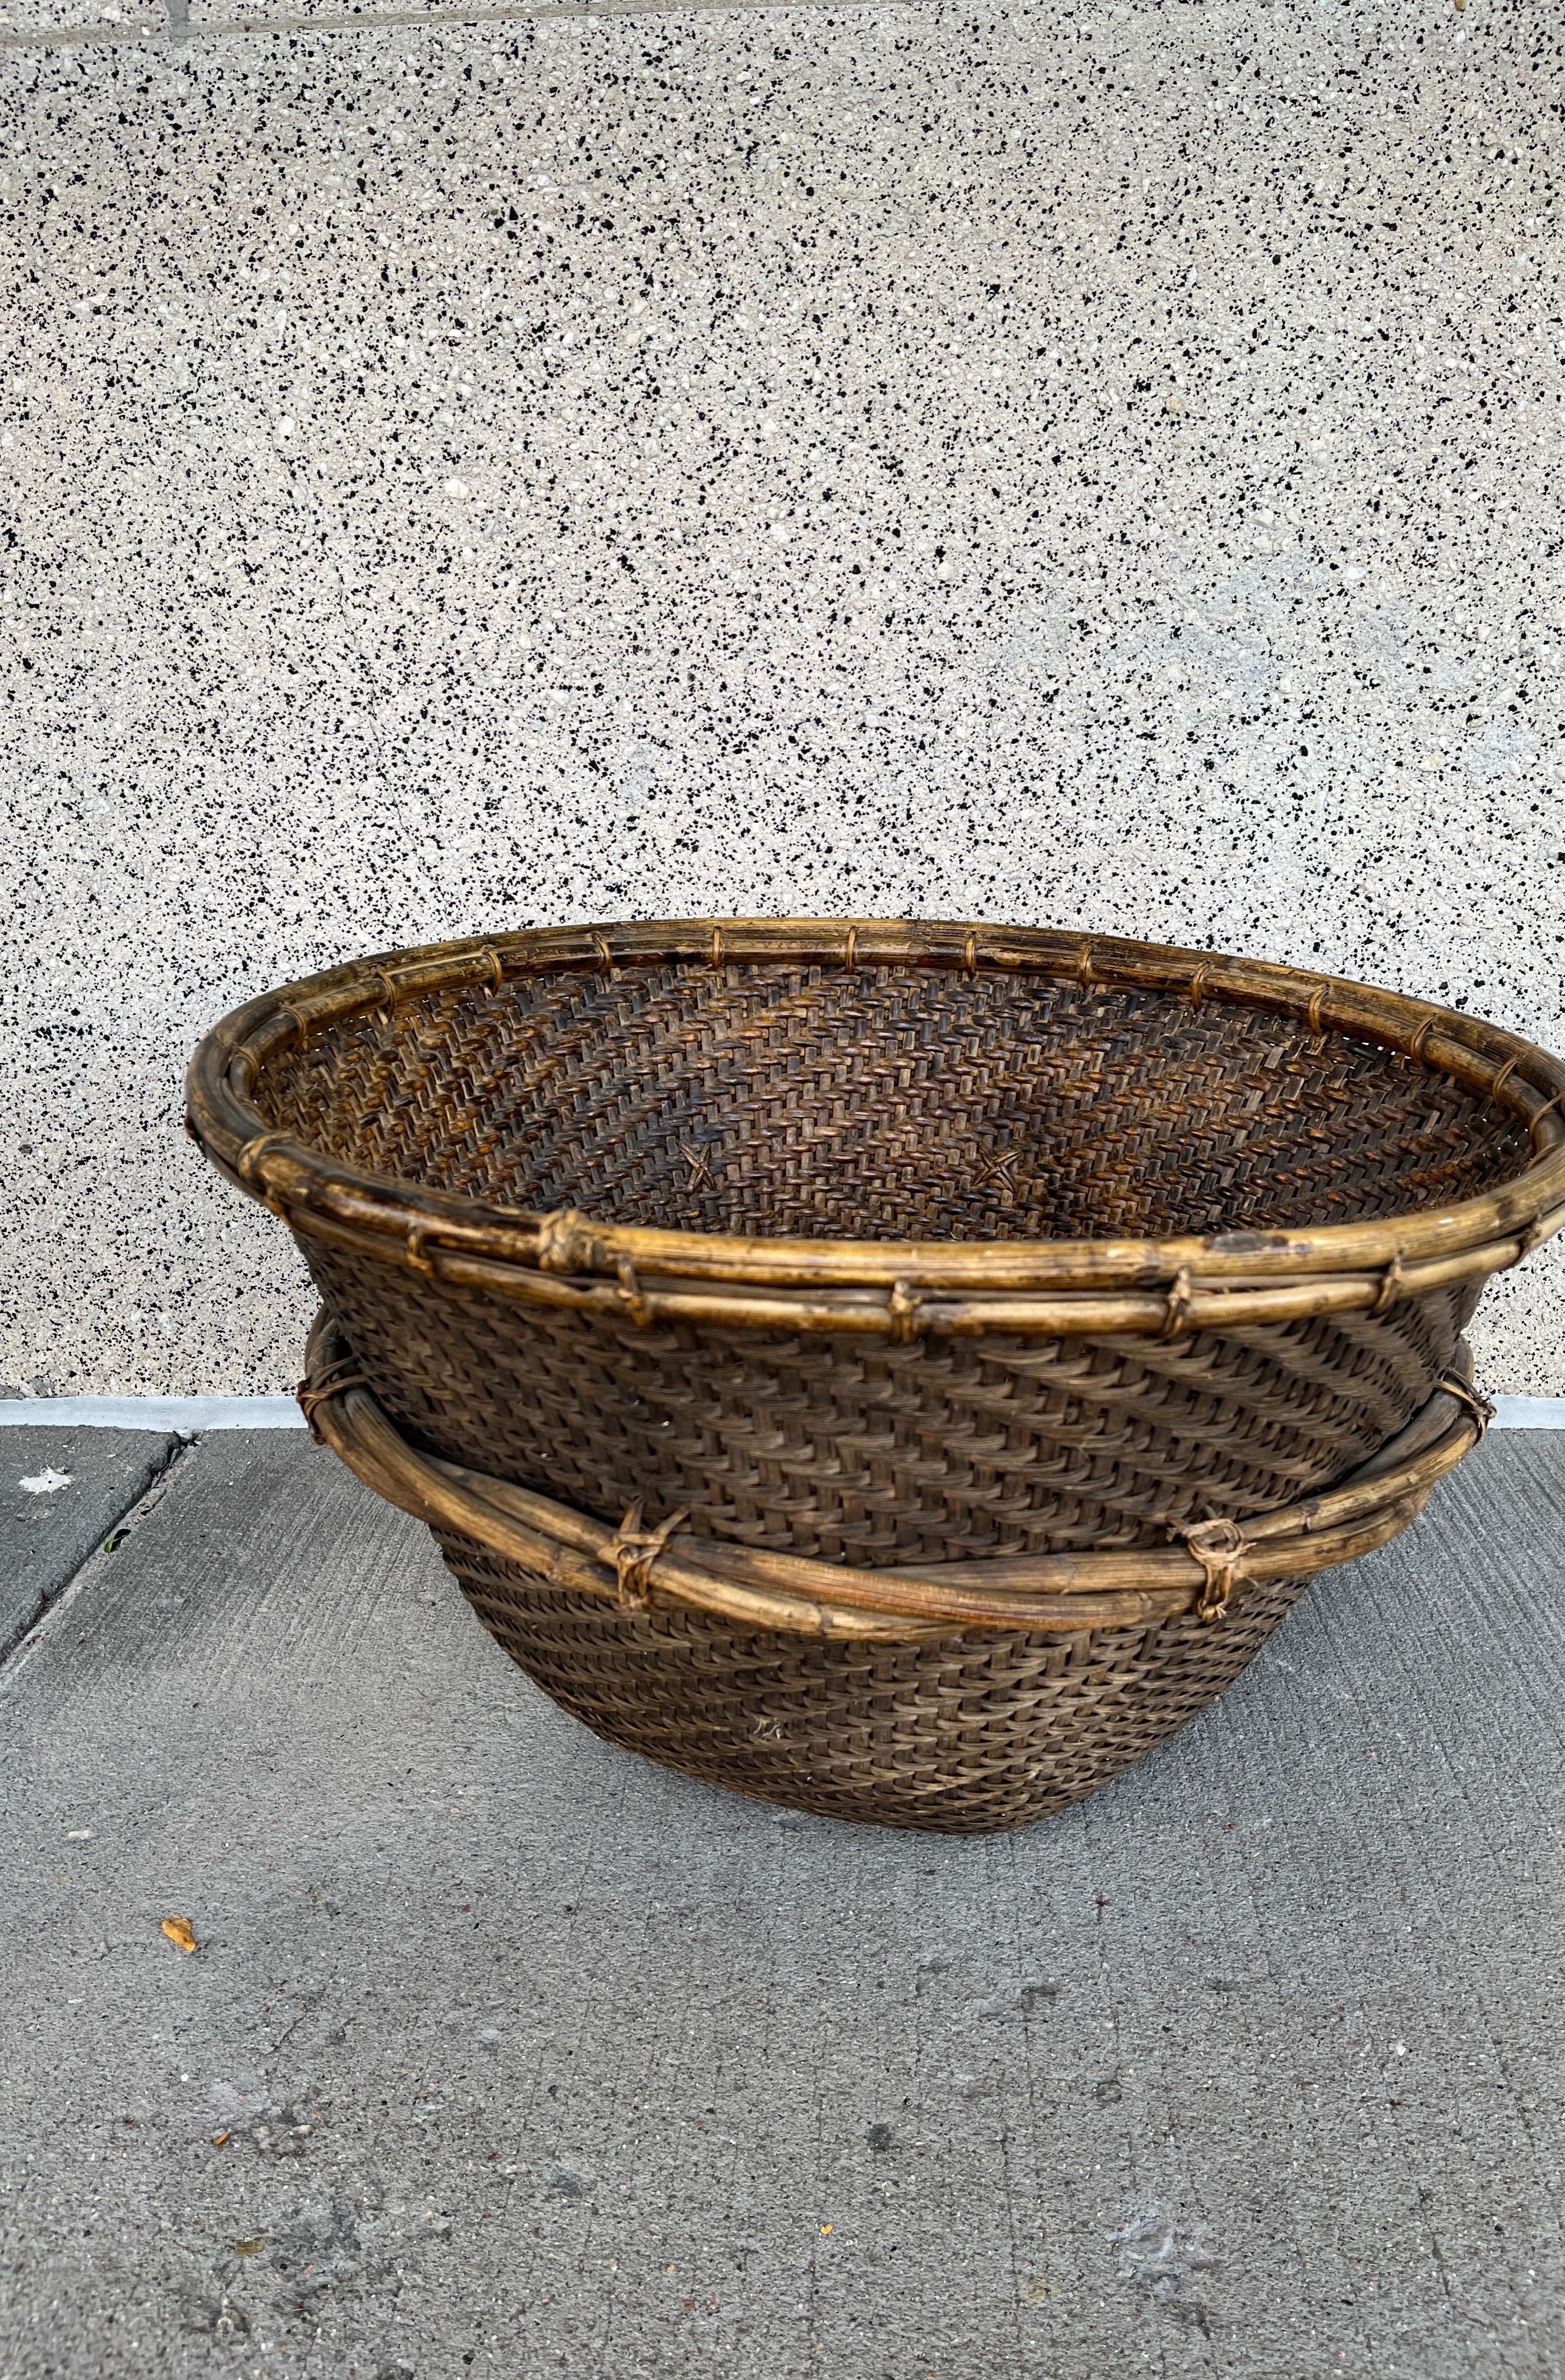 Large Contemporary Woven Basket, Philippines 1